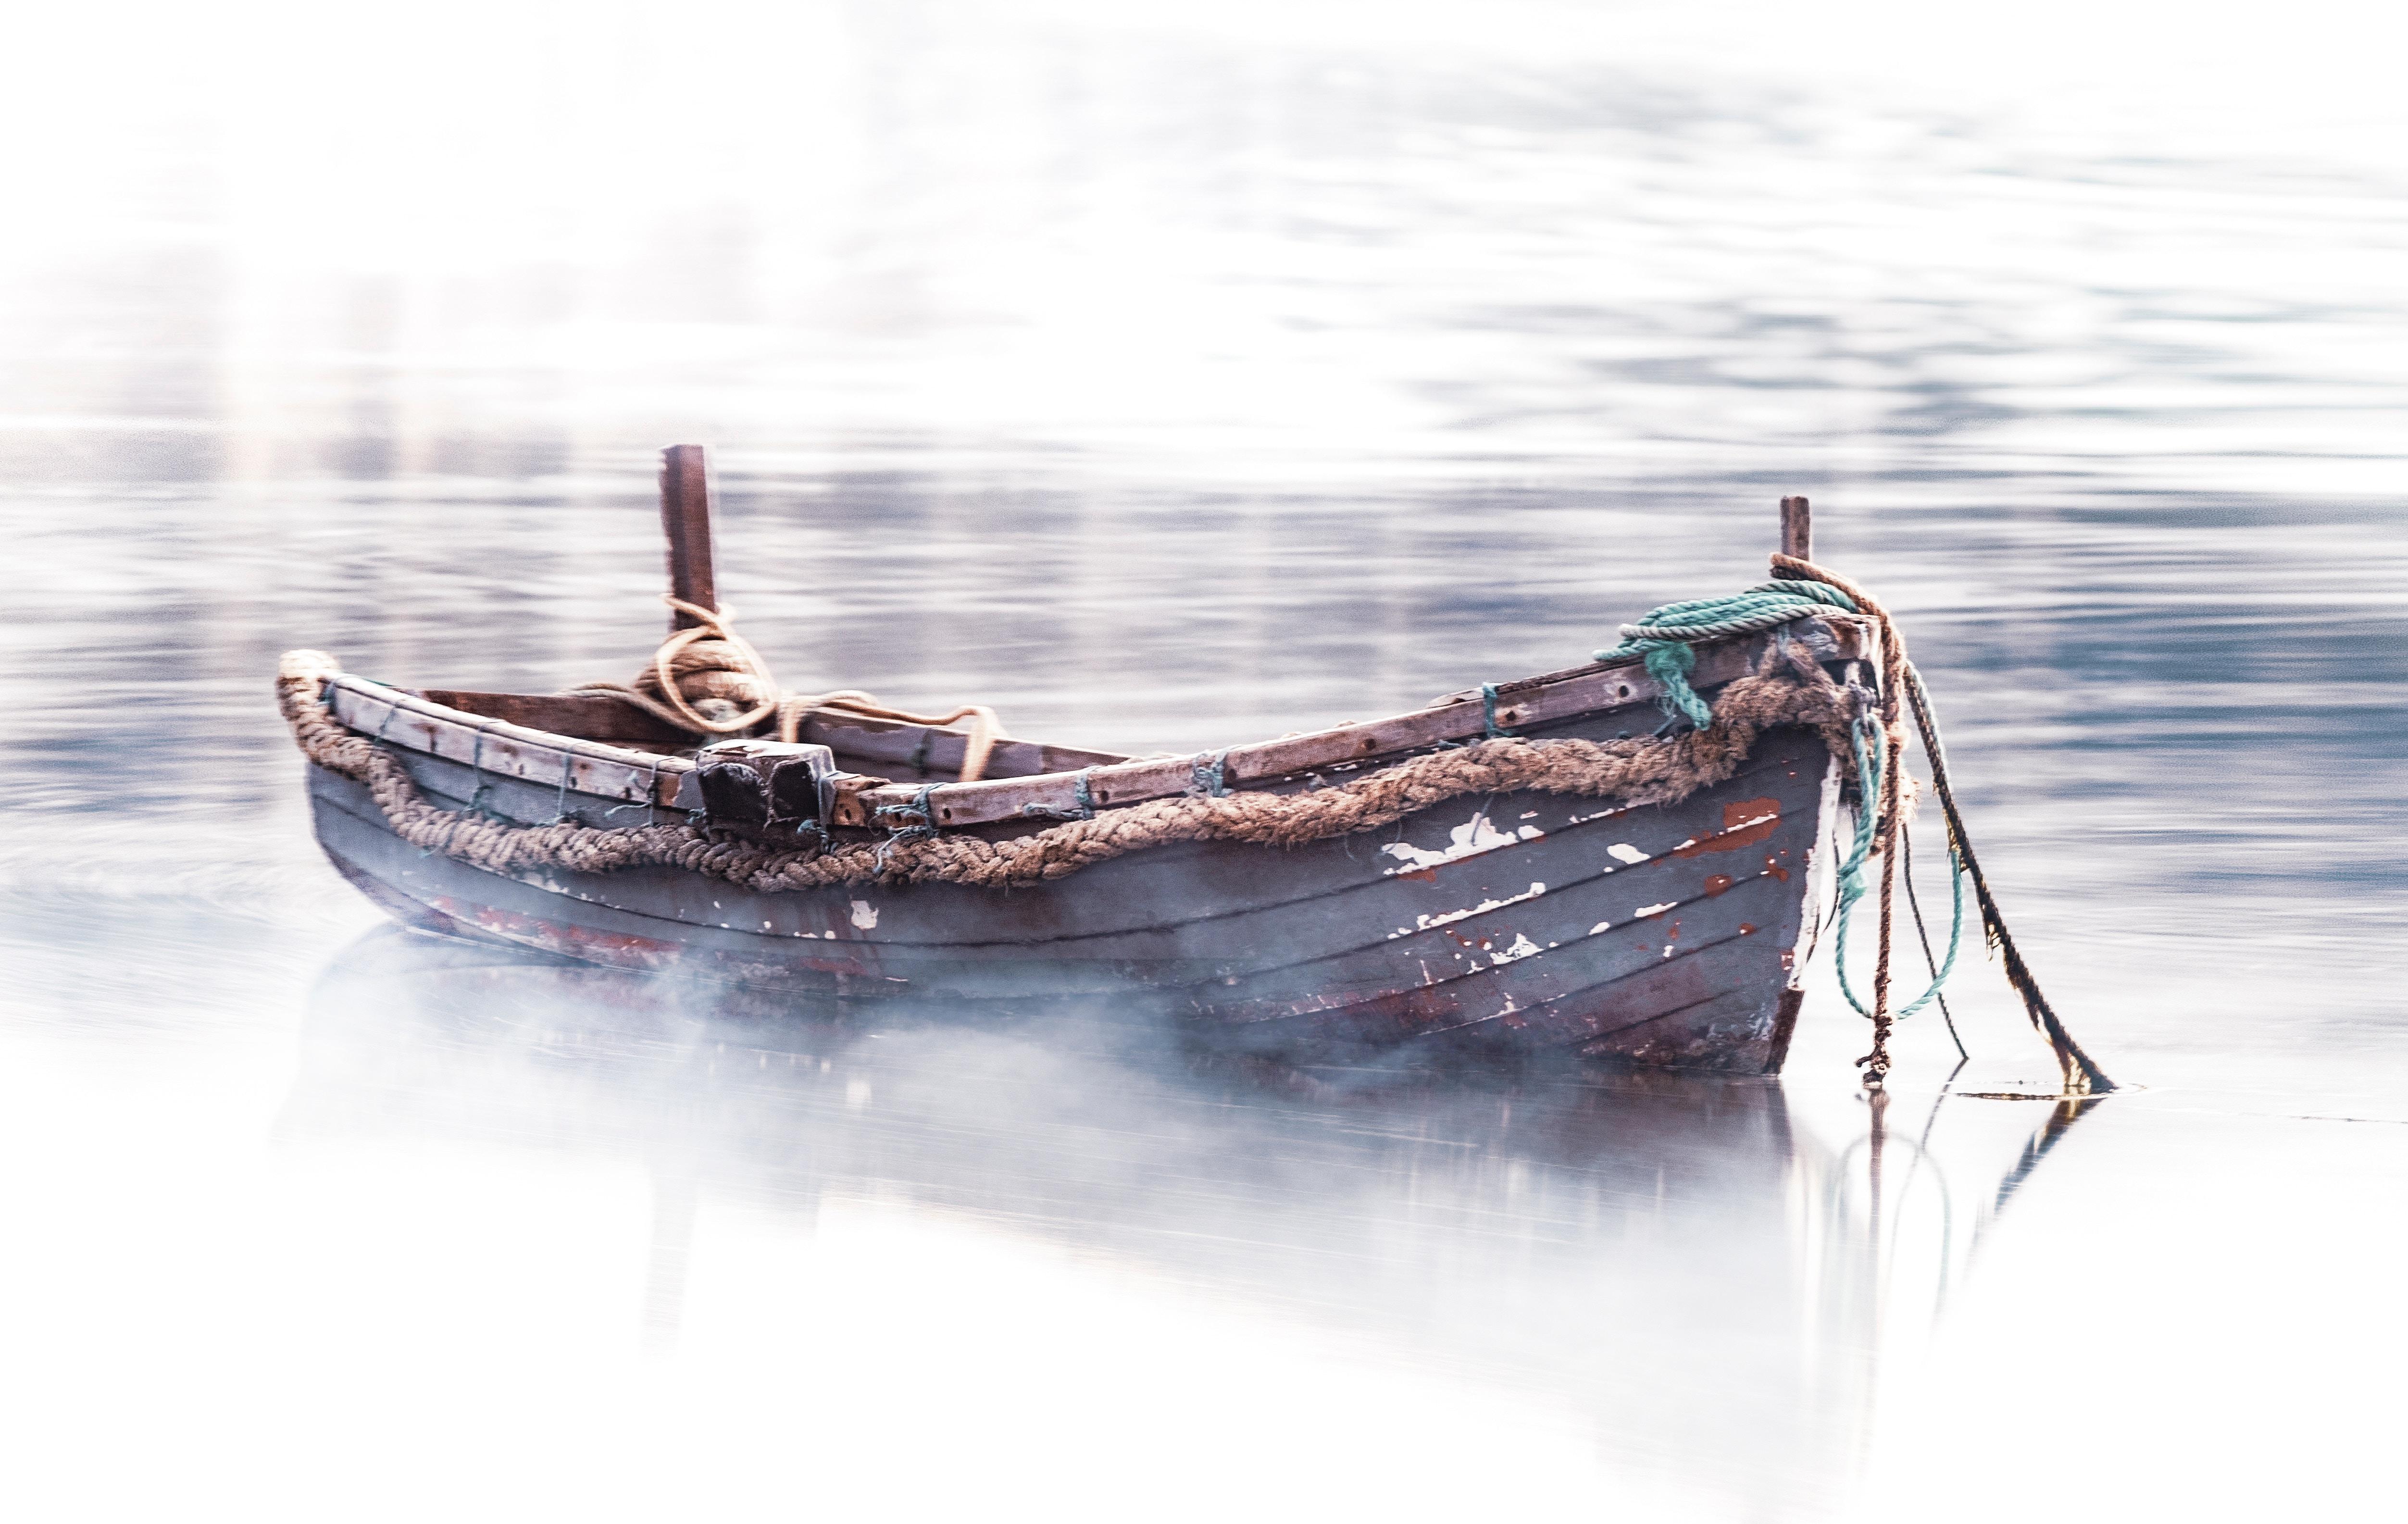 5009x3171 #boat, #Free image, #misty, #water